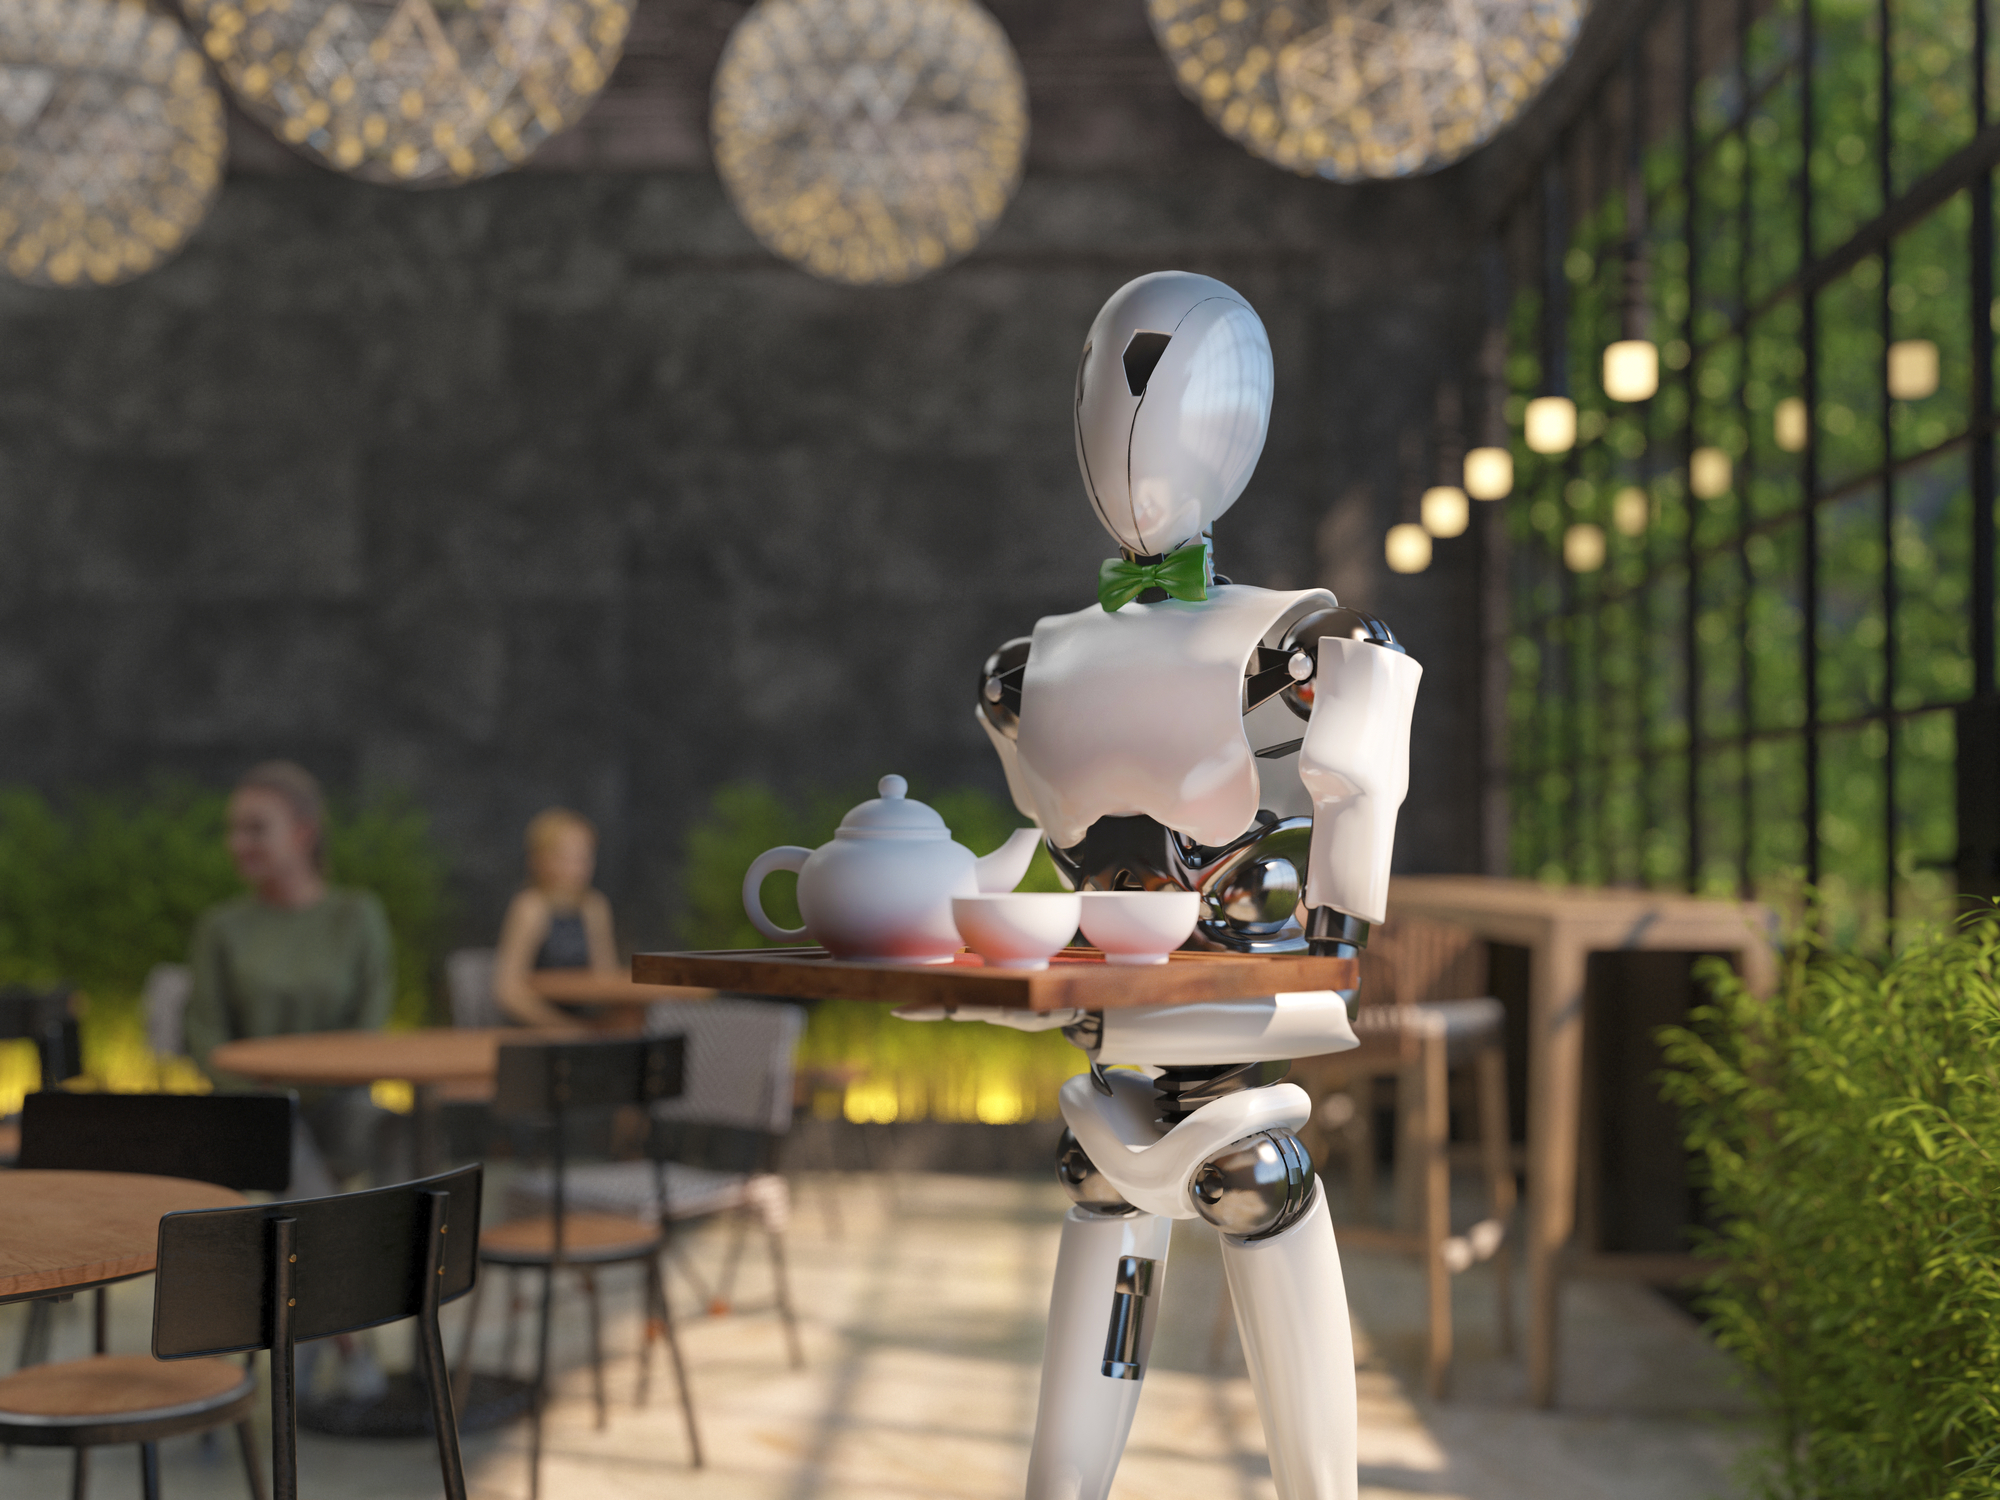 A humanoid robot waiter carries a tray of food and drinks in a r